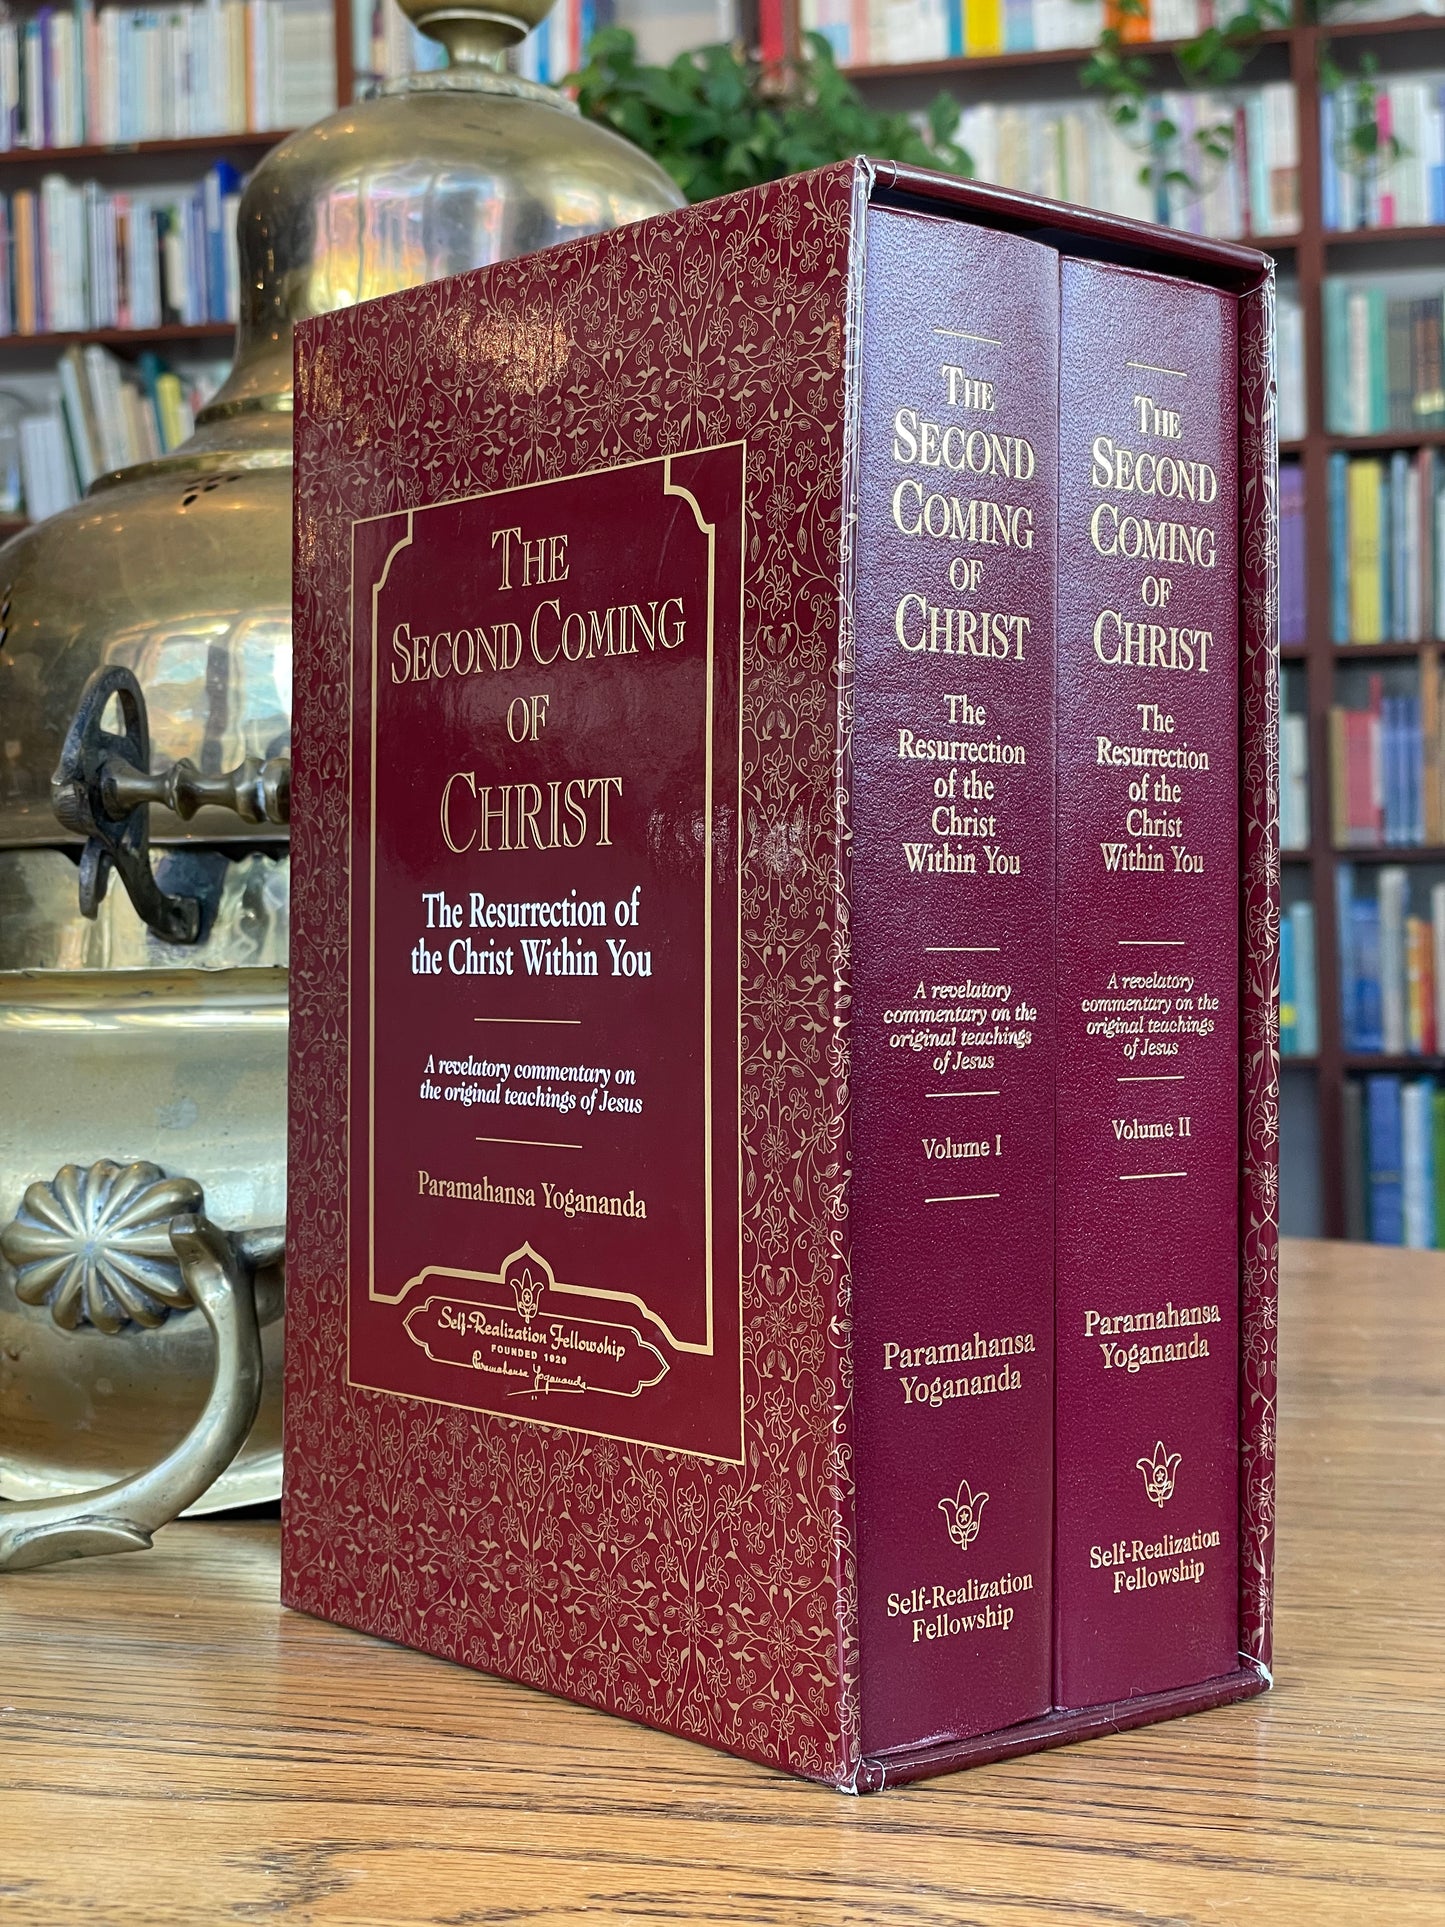 The Second Coming of Christ by Paramanhansa Yogananda